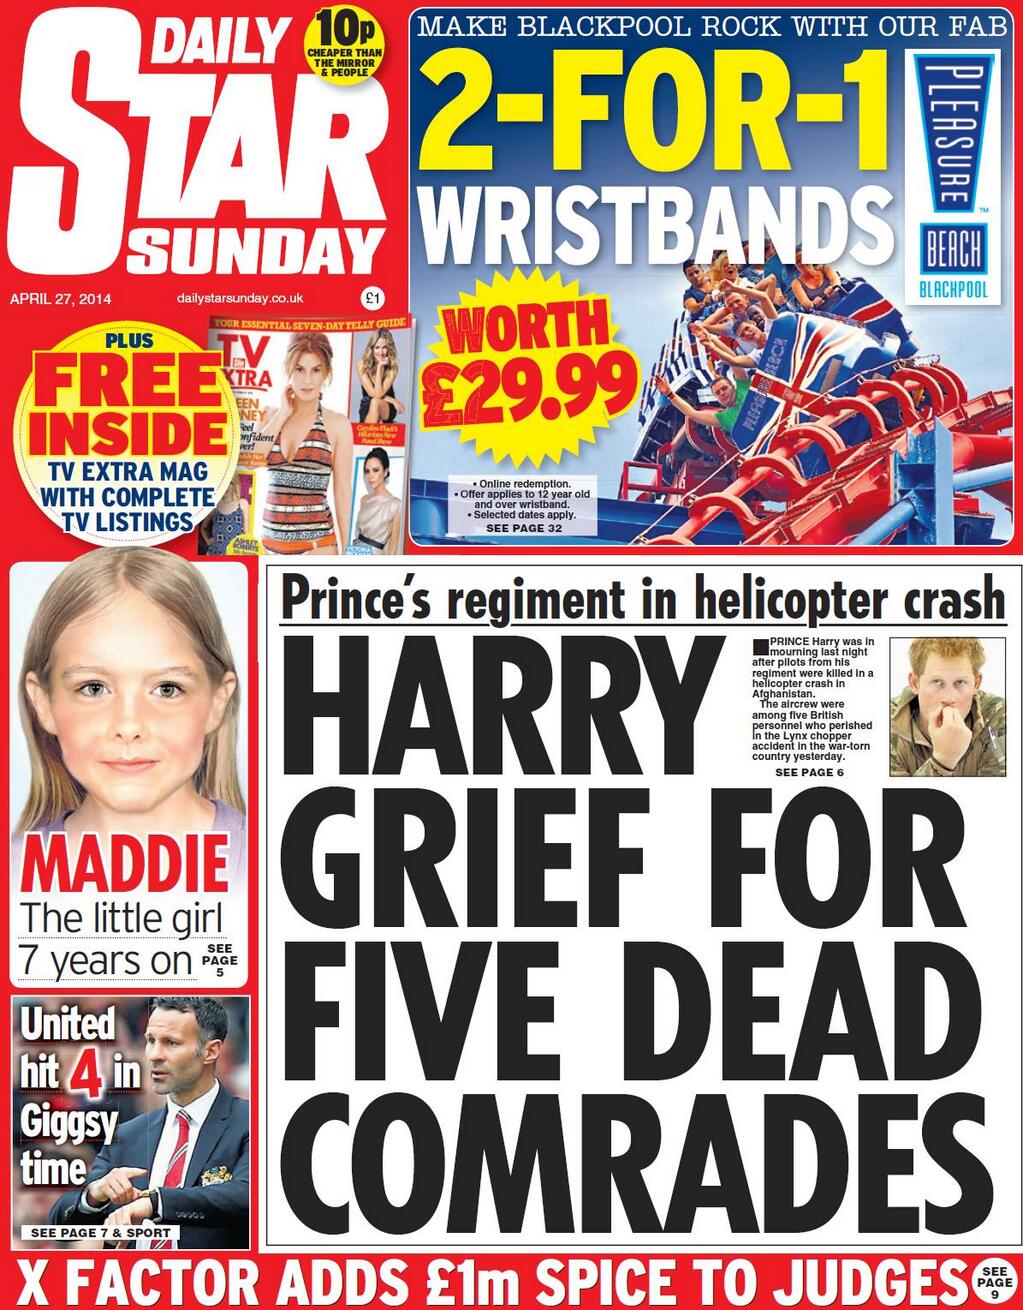 Daily Star Sunday, front page, 27 April 2014